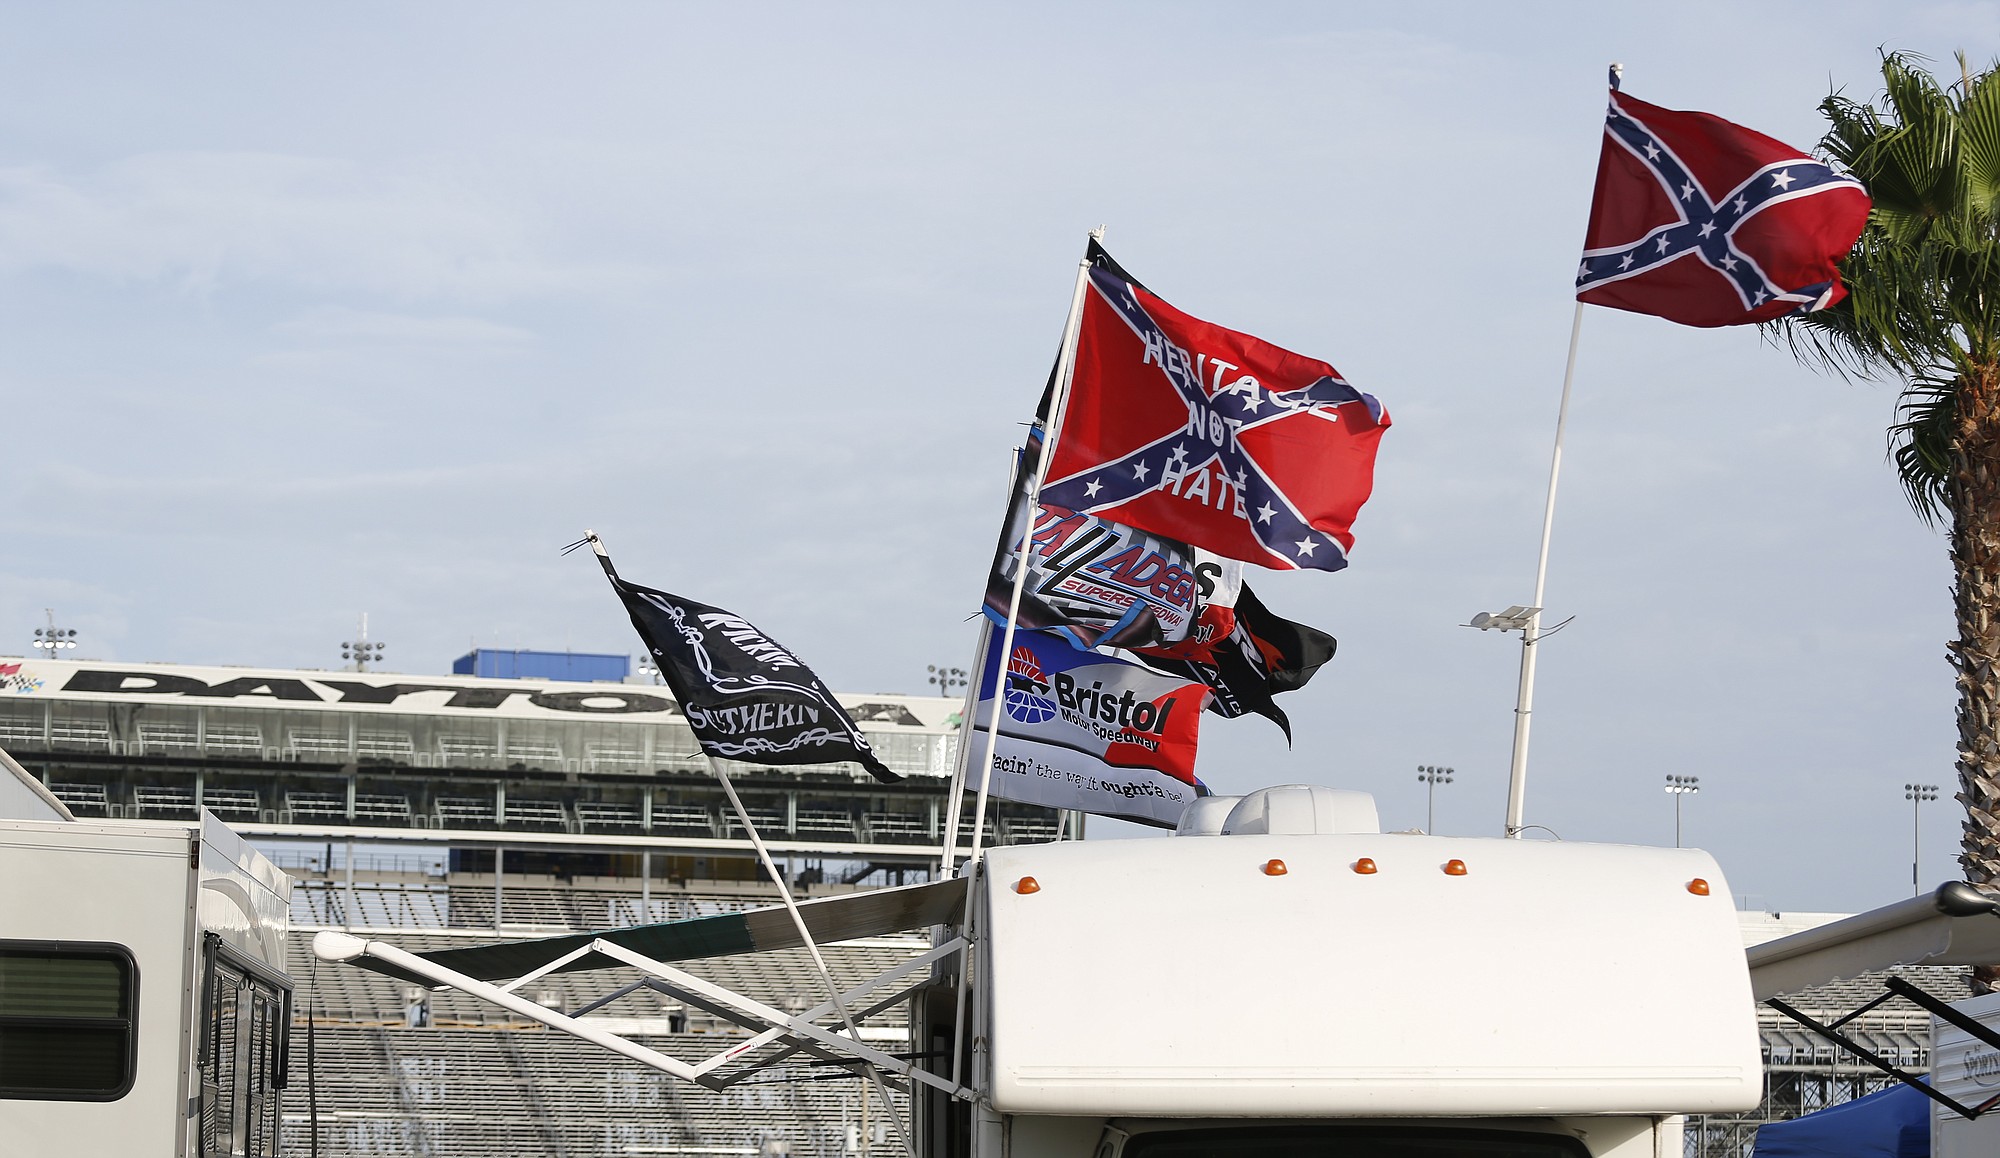 Races fans fly Confederate flags in the infield during a NASCAR Sprint Cup practice session at Daytona International Speedway, Friday, July 3, 2015, in Daytona Beach, Fla.